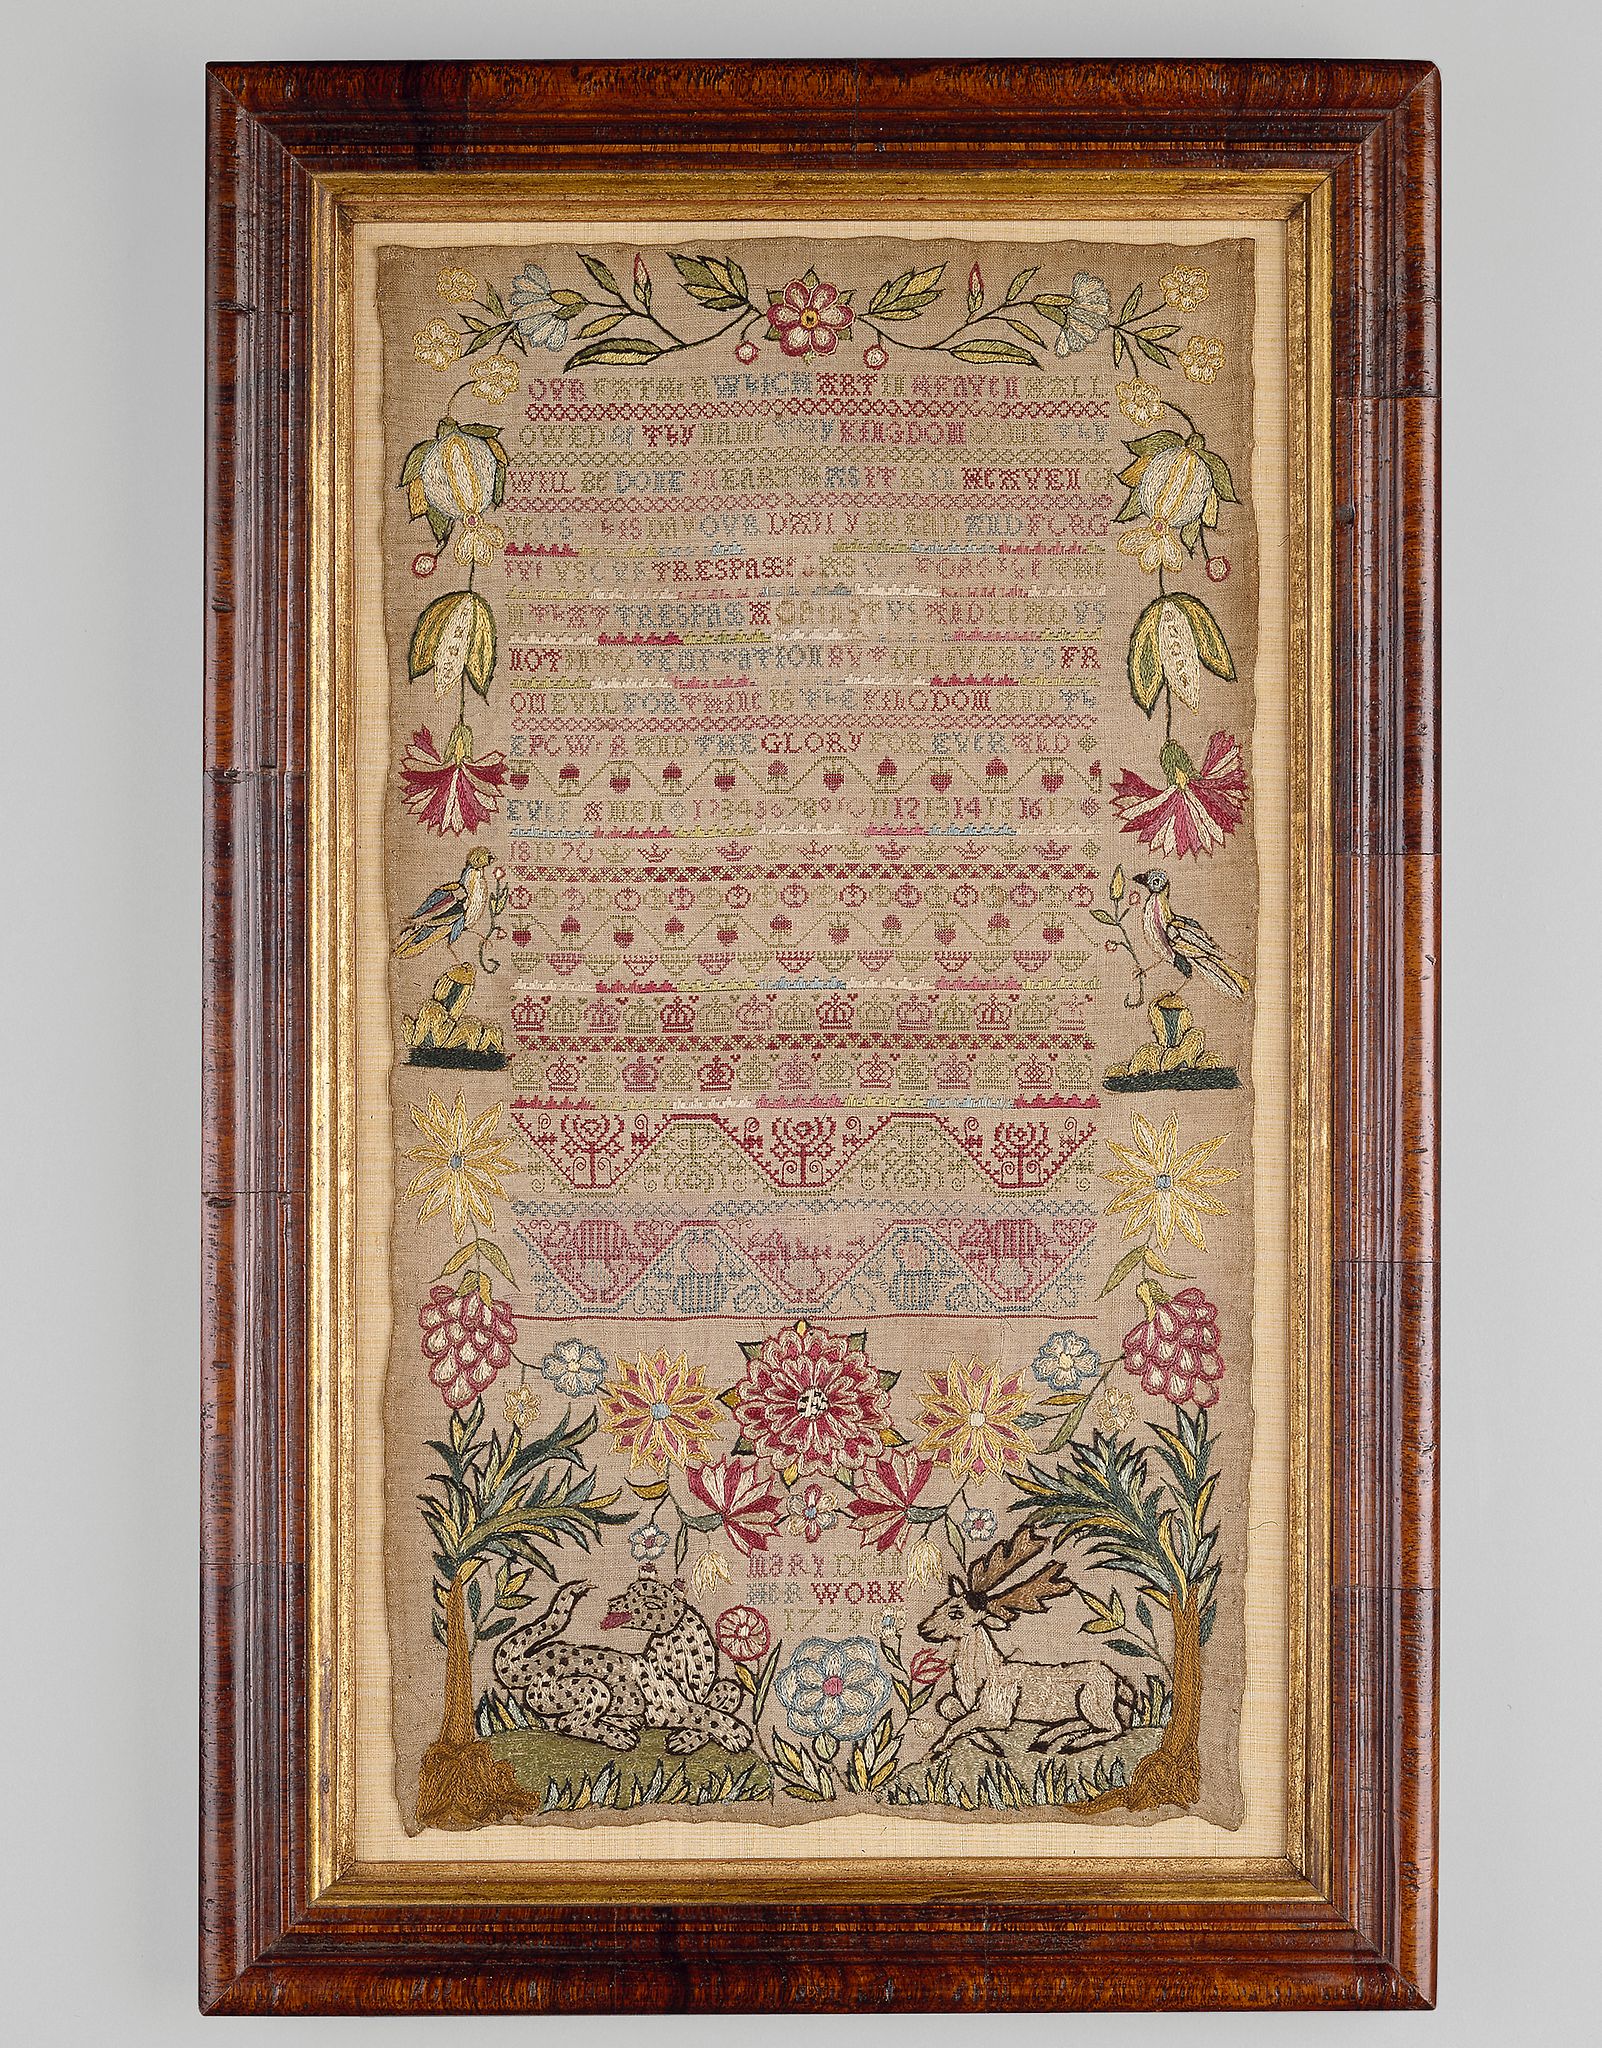 An Early 18th Century Band Sampler worked with the Lord's Prayer, numerals, crowns, honeysuckle